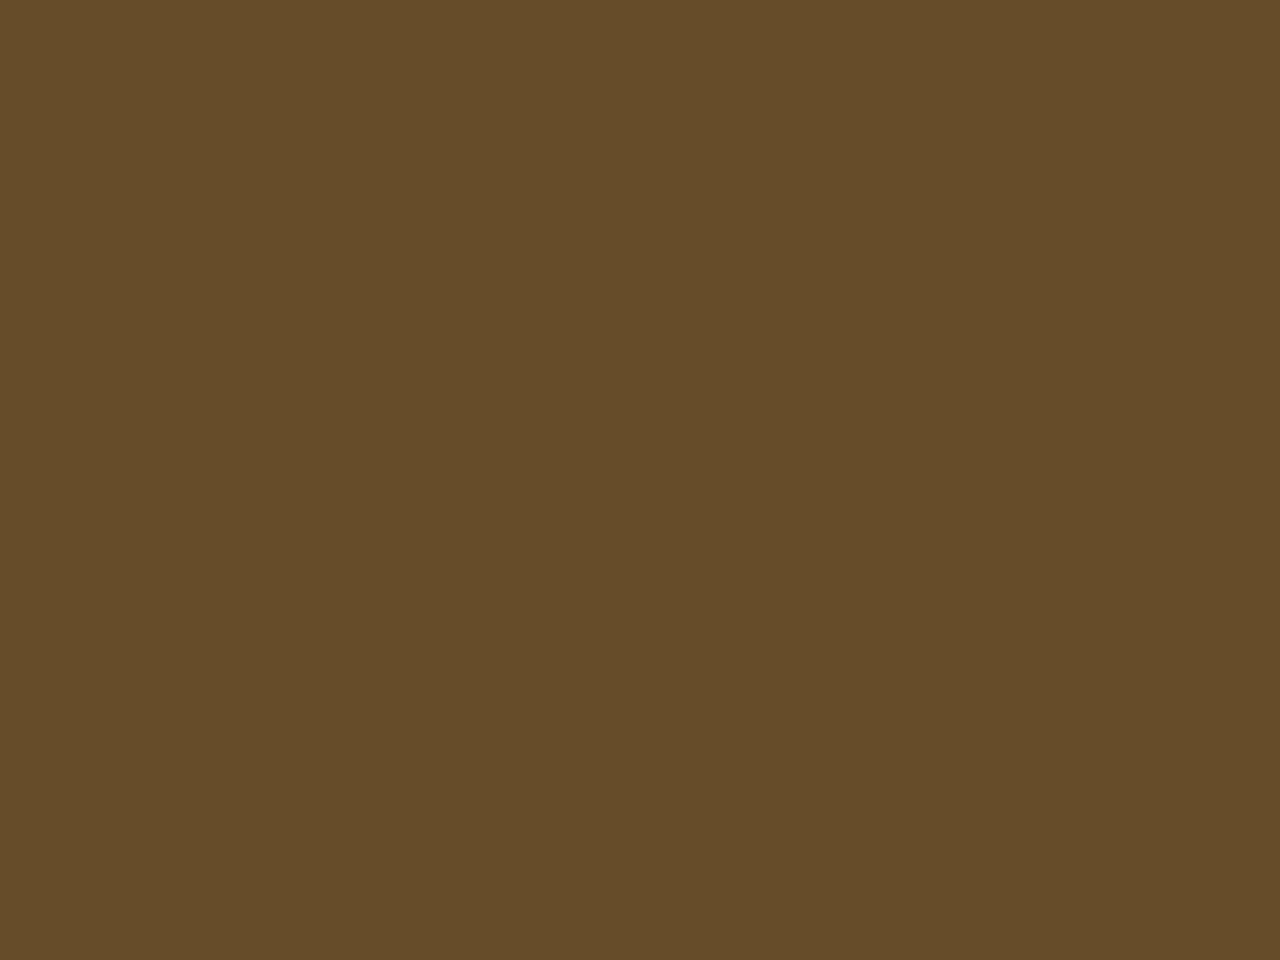 1280x960 Donkey Brown Solid Color Background